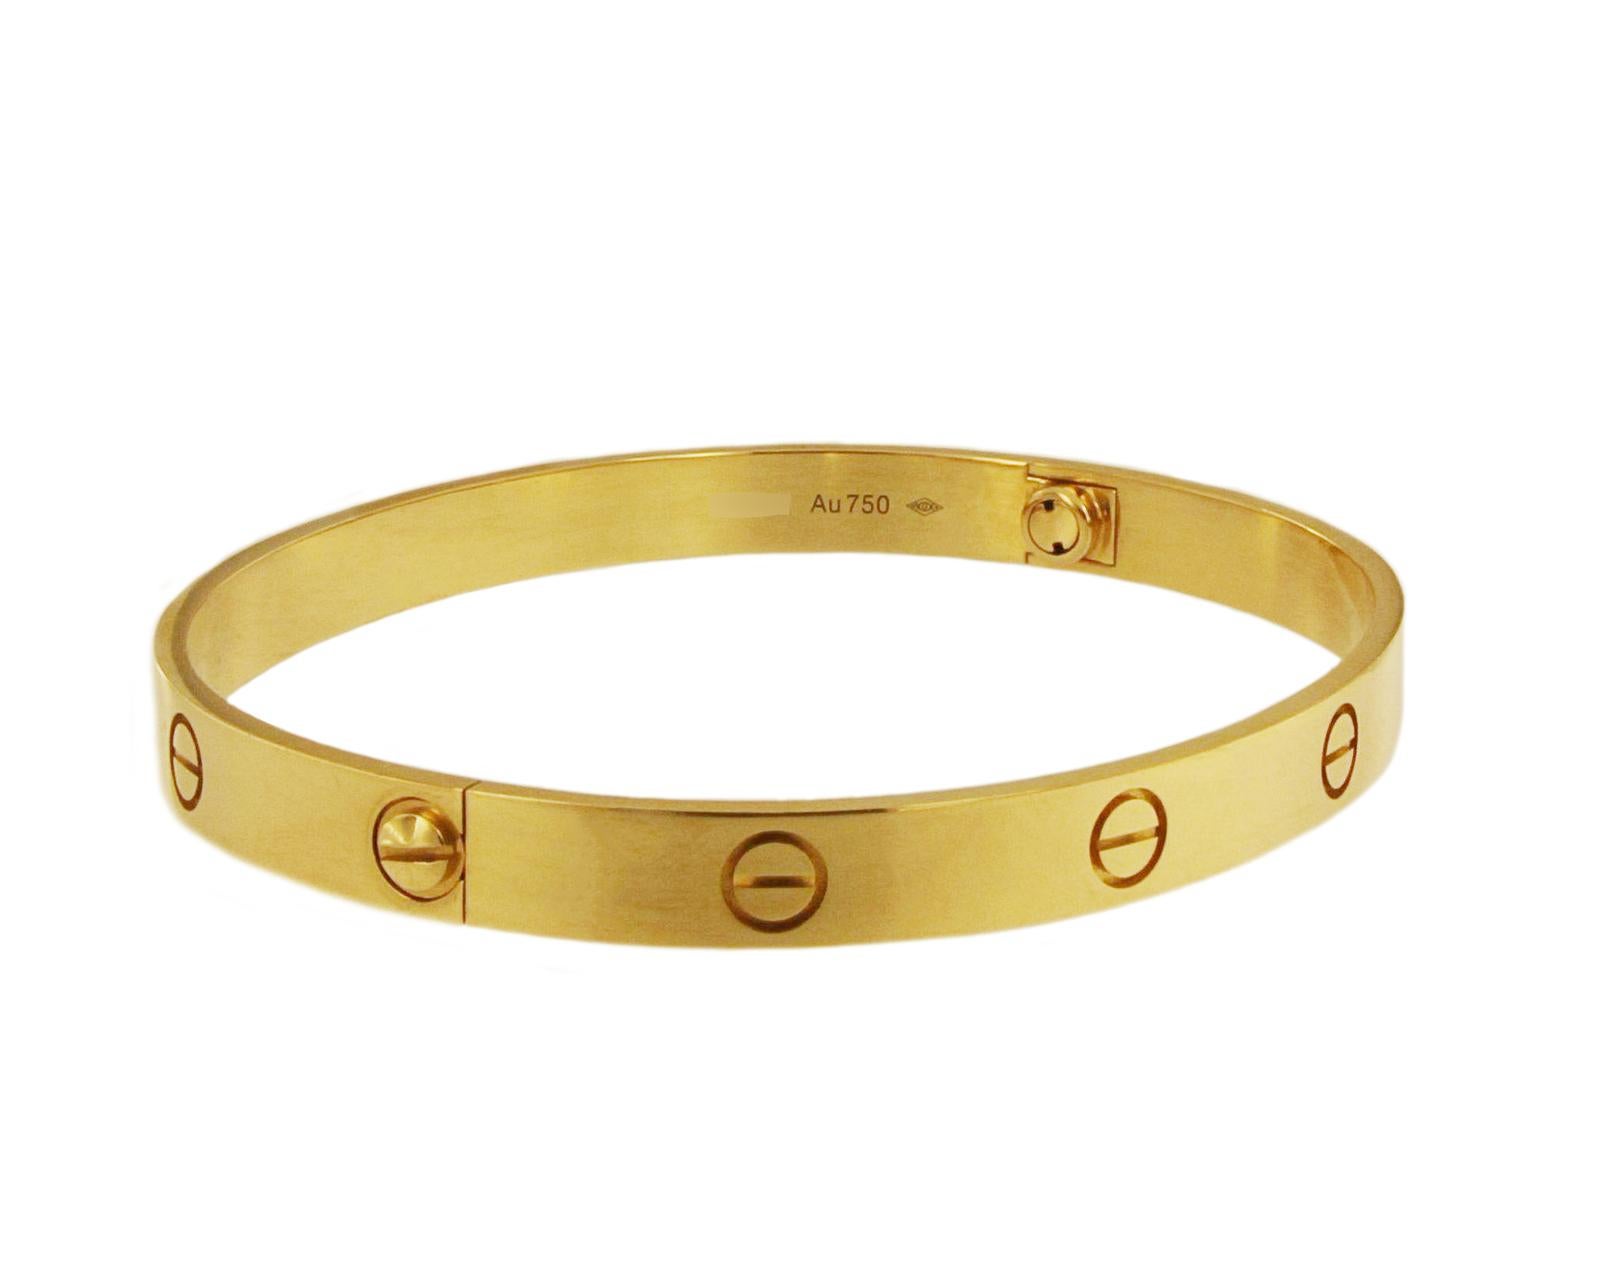 CARTIER LOVE BRACELET SIZE 21

Bracelet with Original Cartier Box & Papers.

A bracelet, 18K yellow gold. Sold with a screwdriver.

A child of 1970s New York, the LOVE collection remains today an iconic symbol of love that transgresses convention.